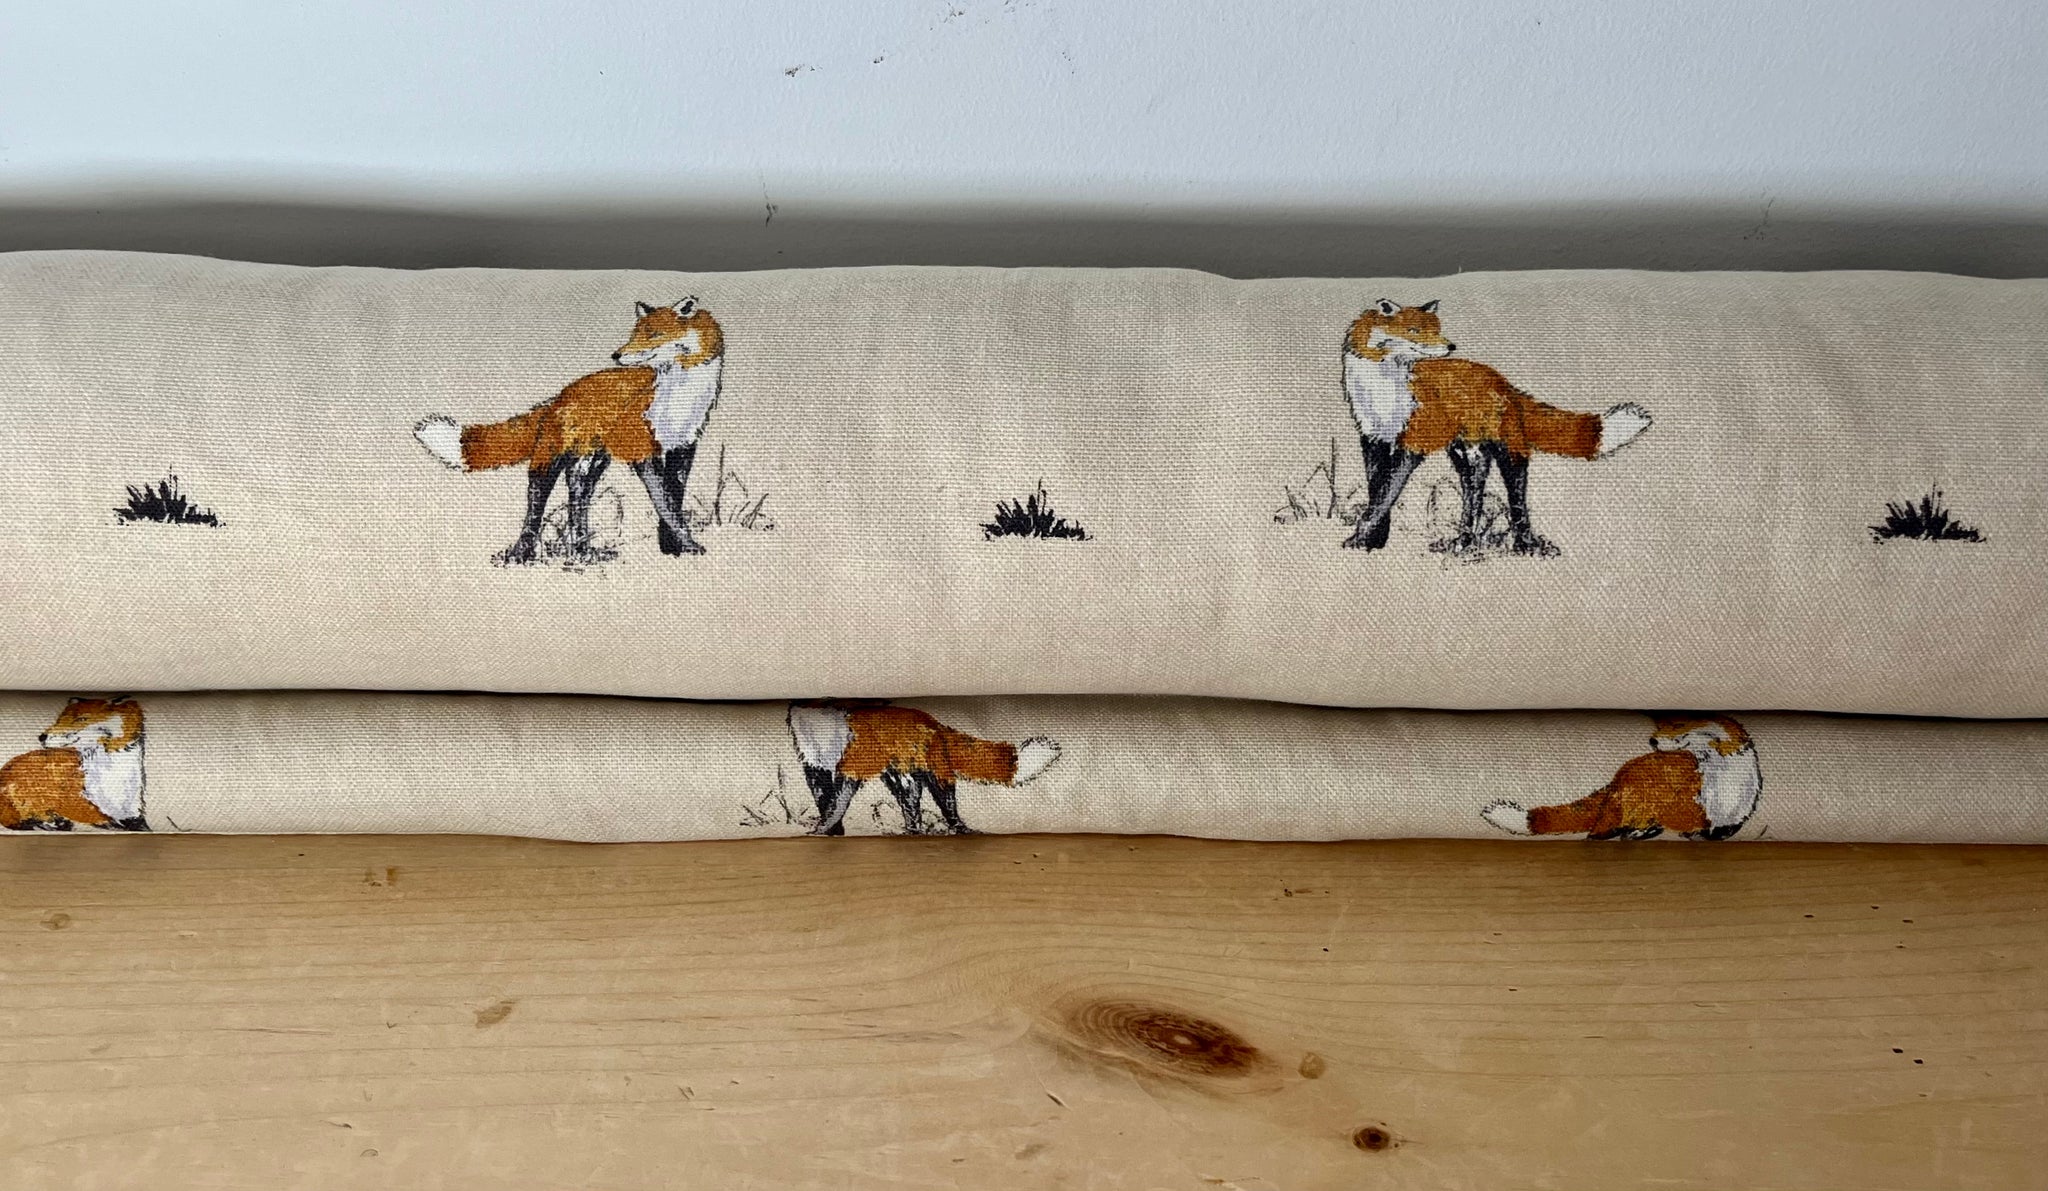 Fox Draught Excluder